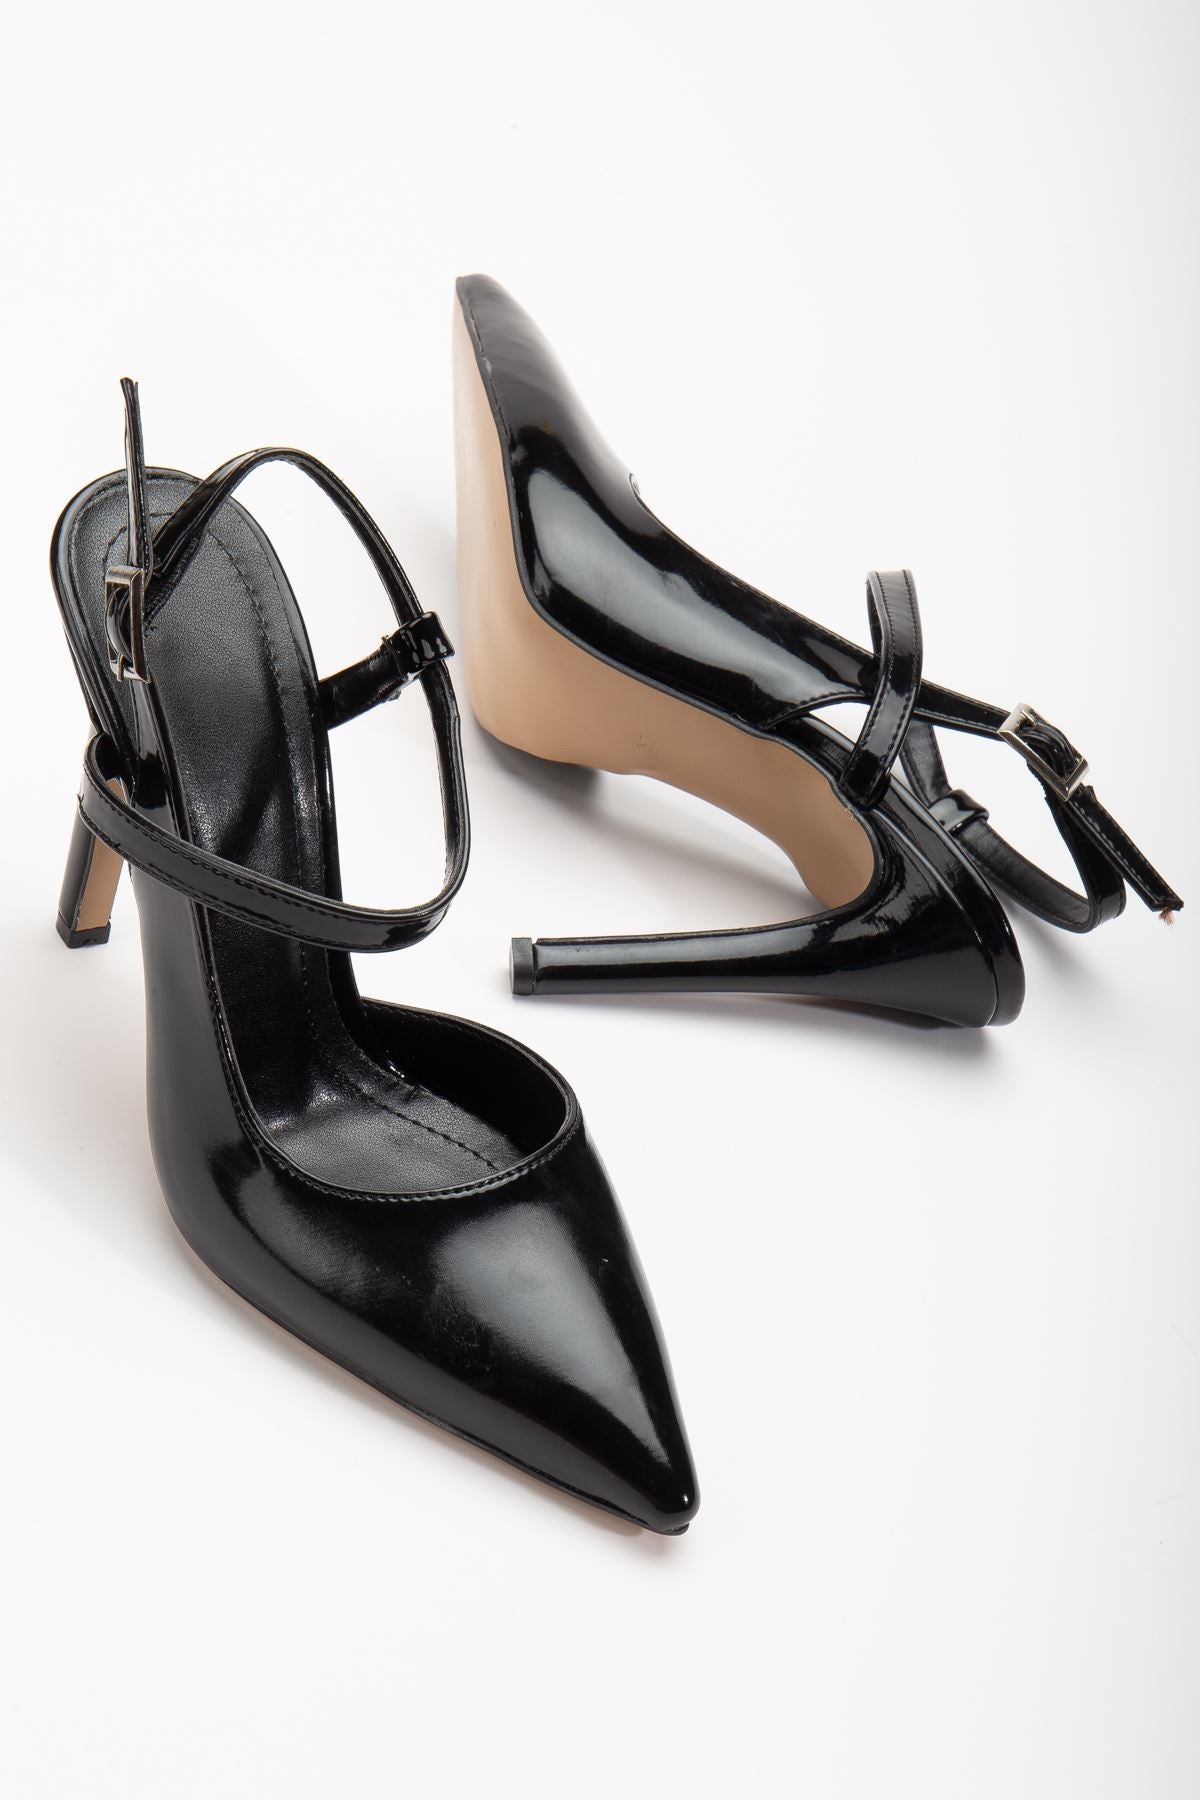 Nely Black Patent Leather Pointed Women's Heeled Shoes - STREETMODE™